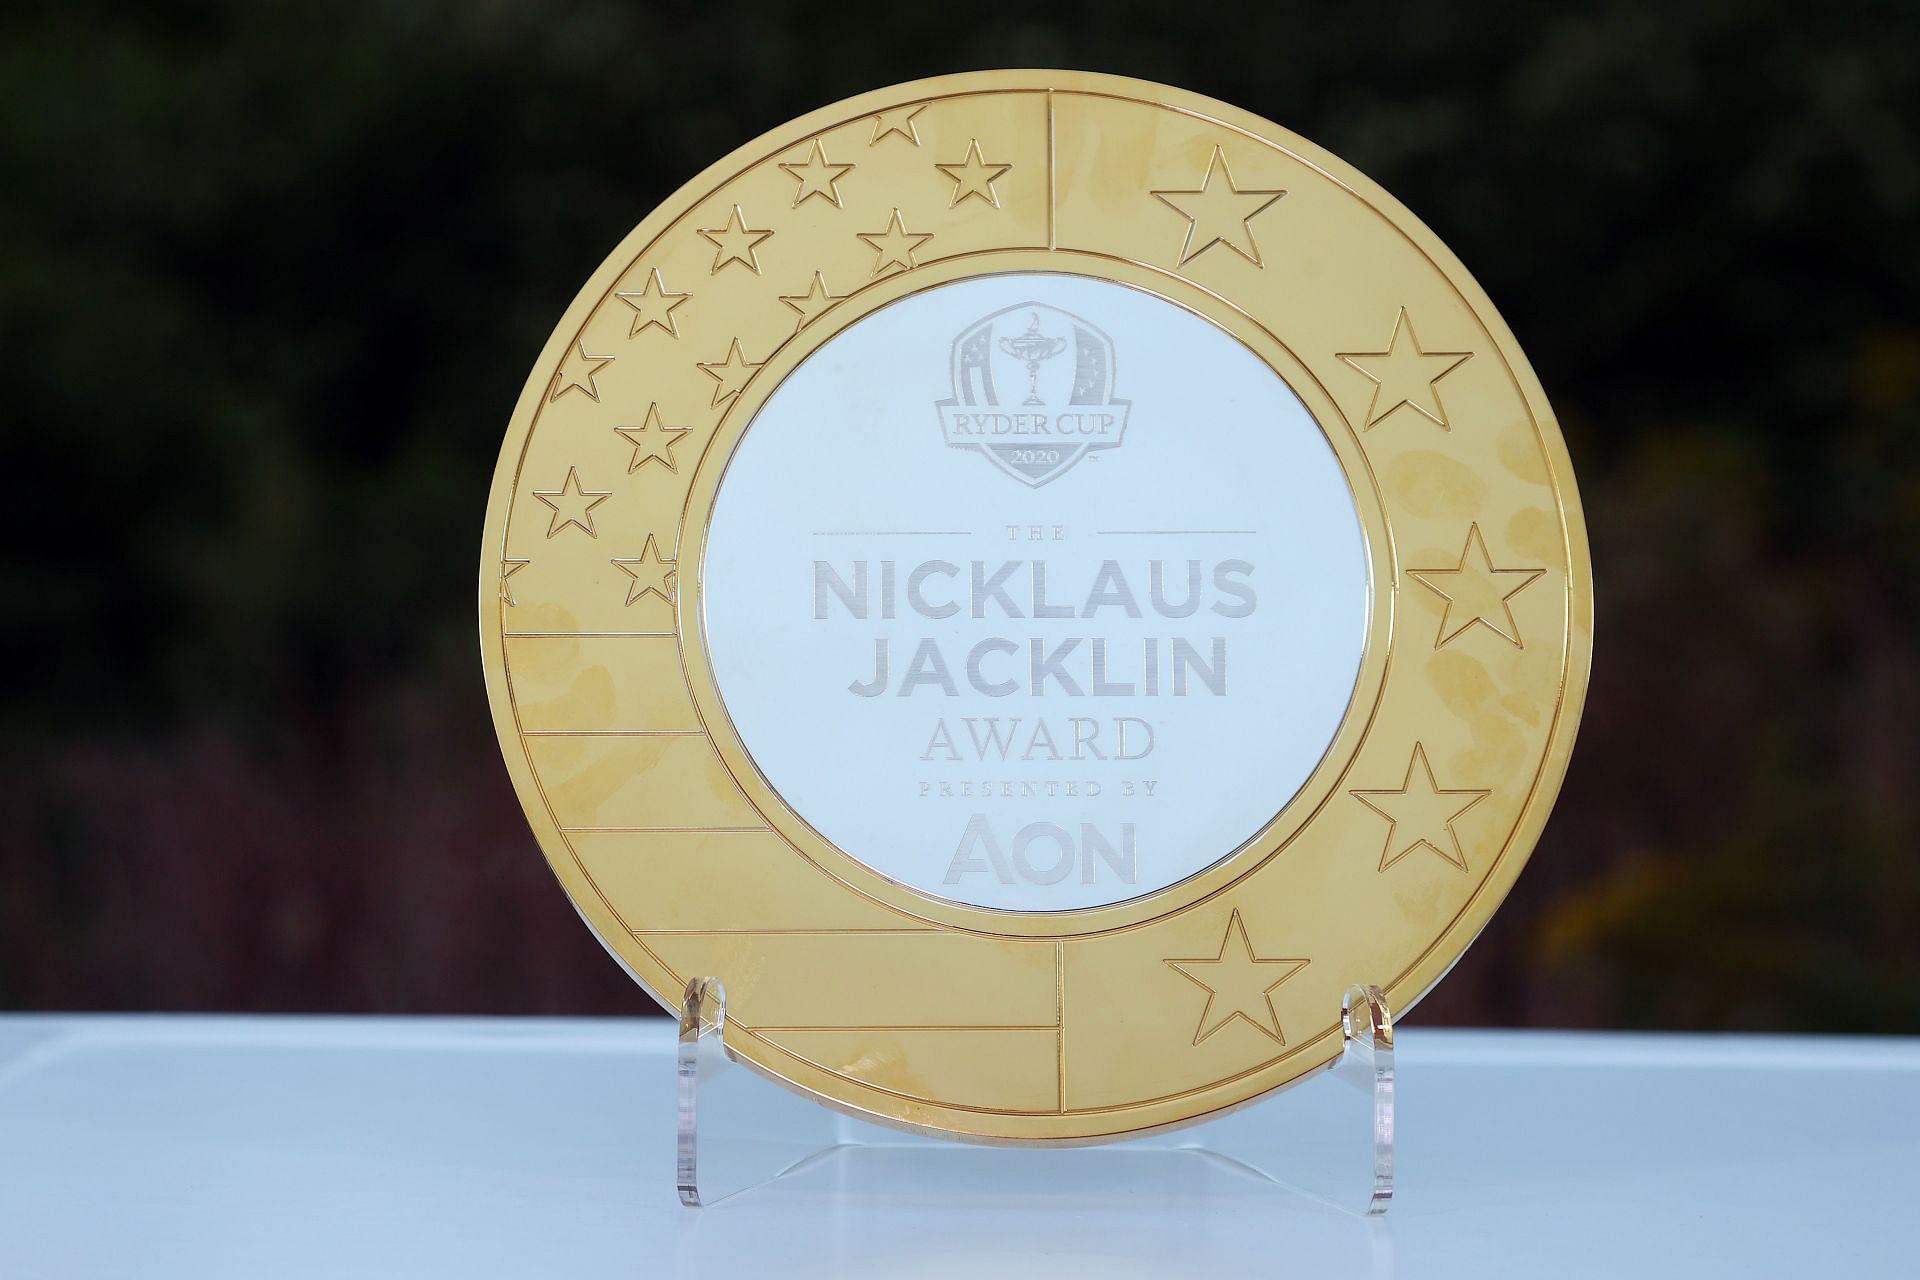 The Nicklaus Jacklin award at the 2020 Ryder Cup